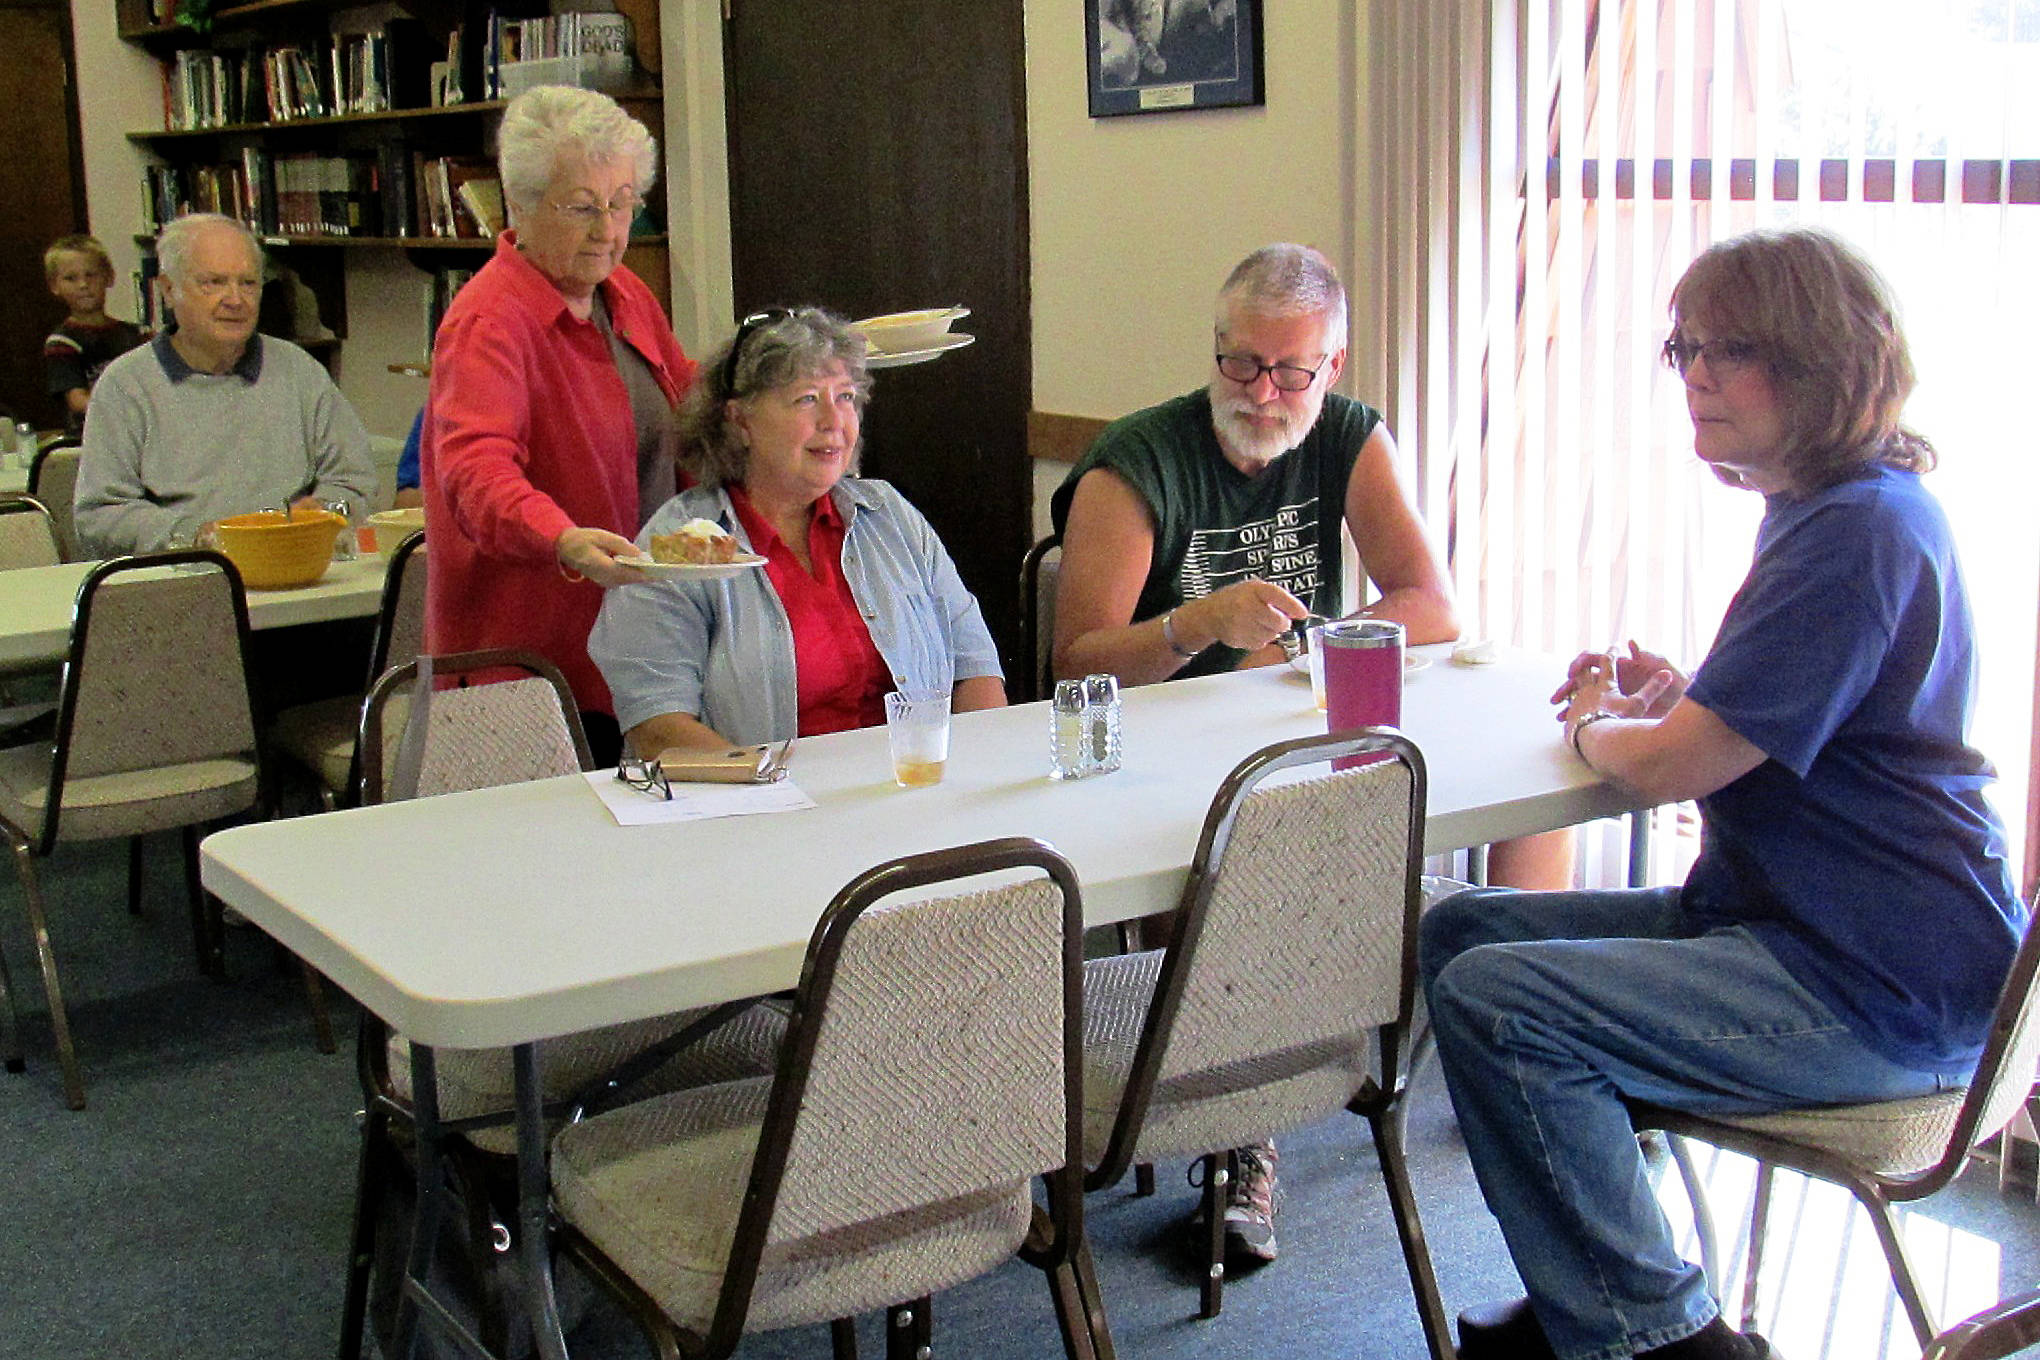 Scott D, Johnston photo Volunteer Connie Jones serves patrons at the Grace Cafe, while Pastor Collette Gould, far right, looks on. A free community meal is served from 11 a.m. to 1 p.m. each Friday at Galilean Lutheran Church in Ocean Shores.